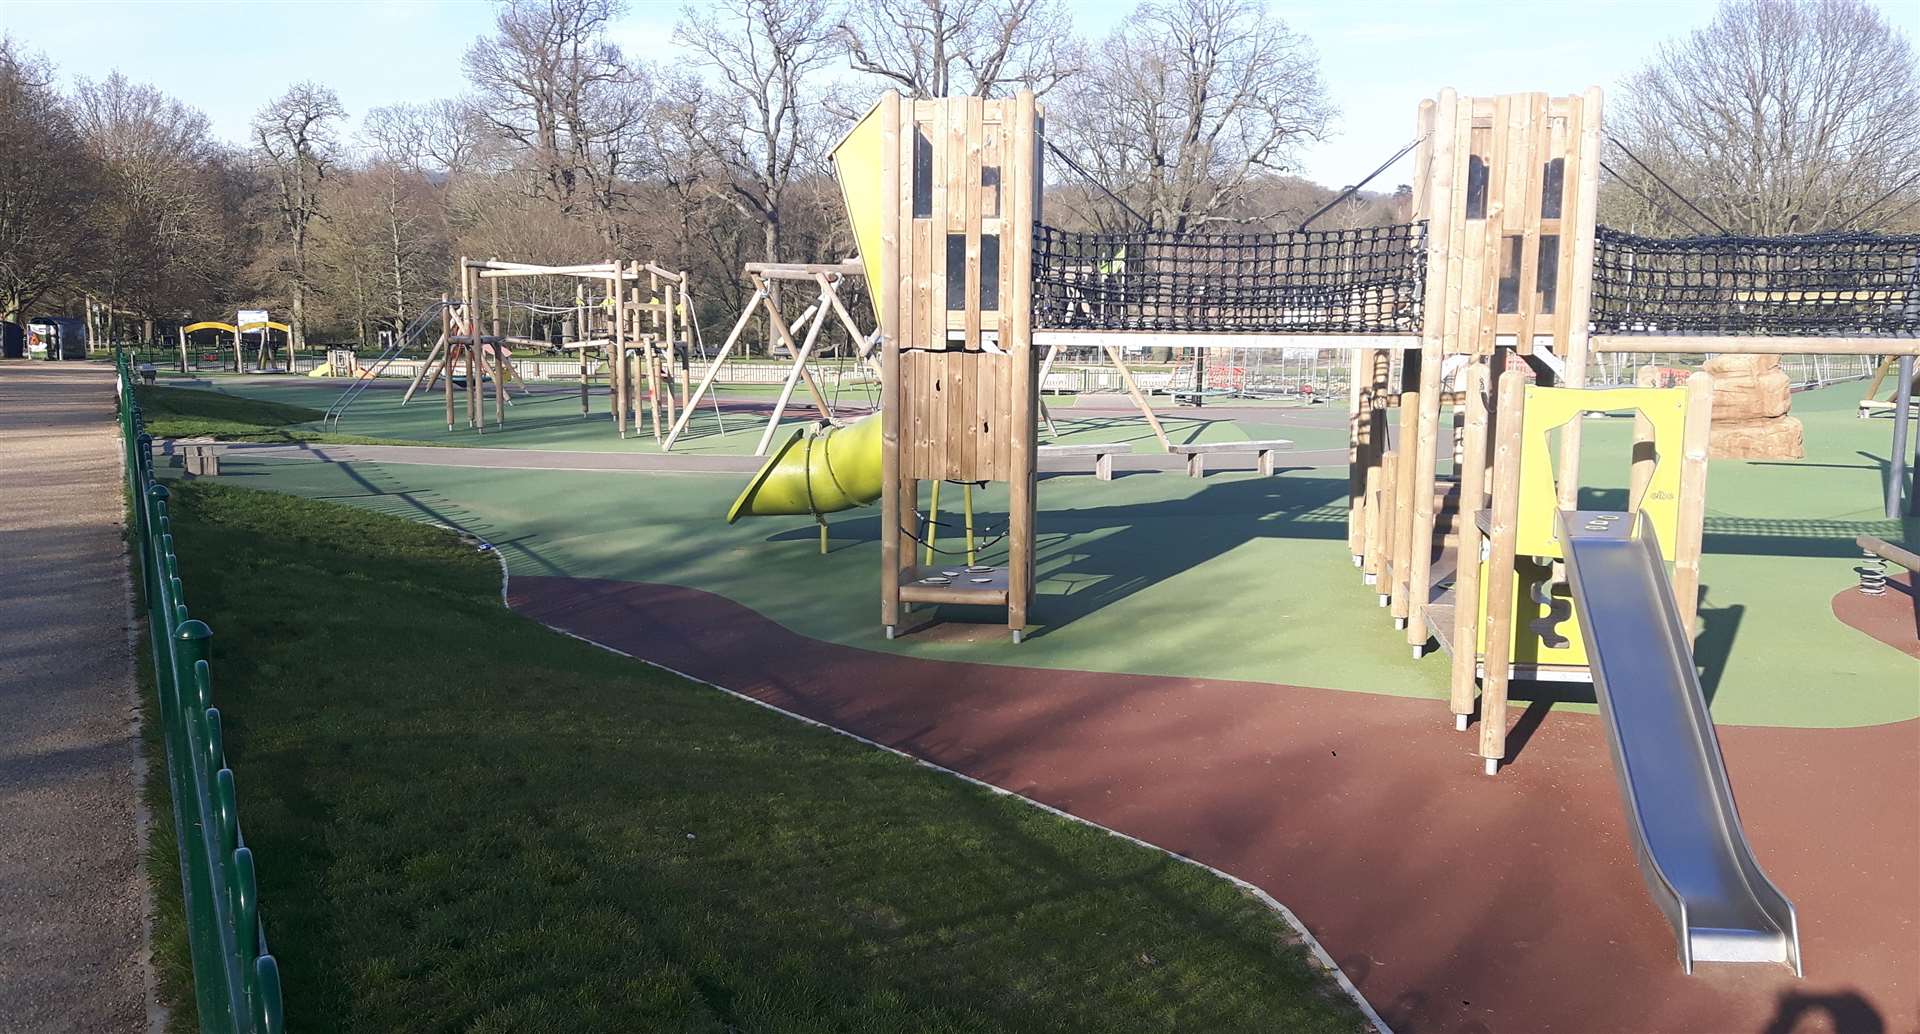 The children's play area at Mote Park was locked and empty during the lockdown